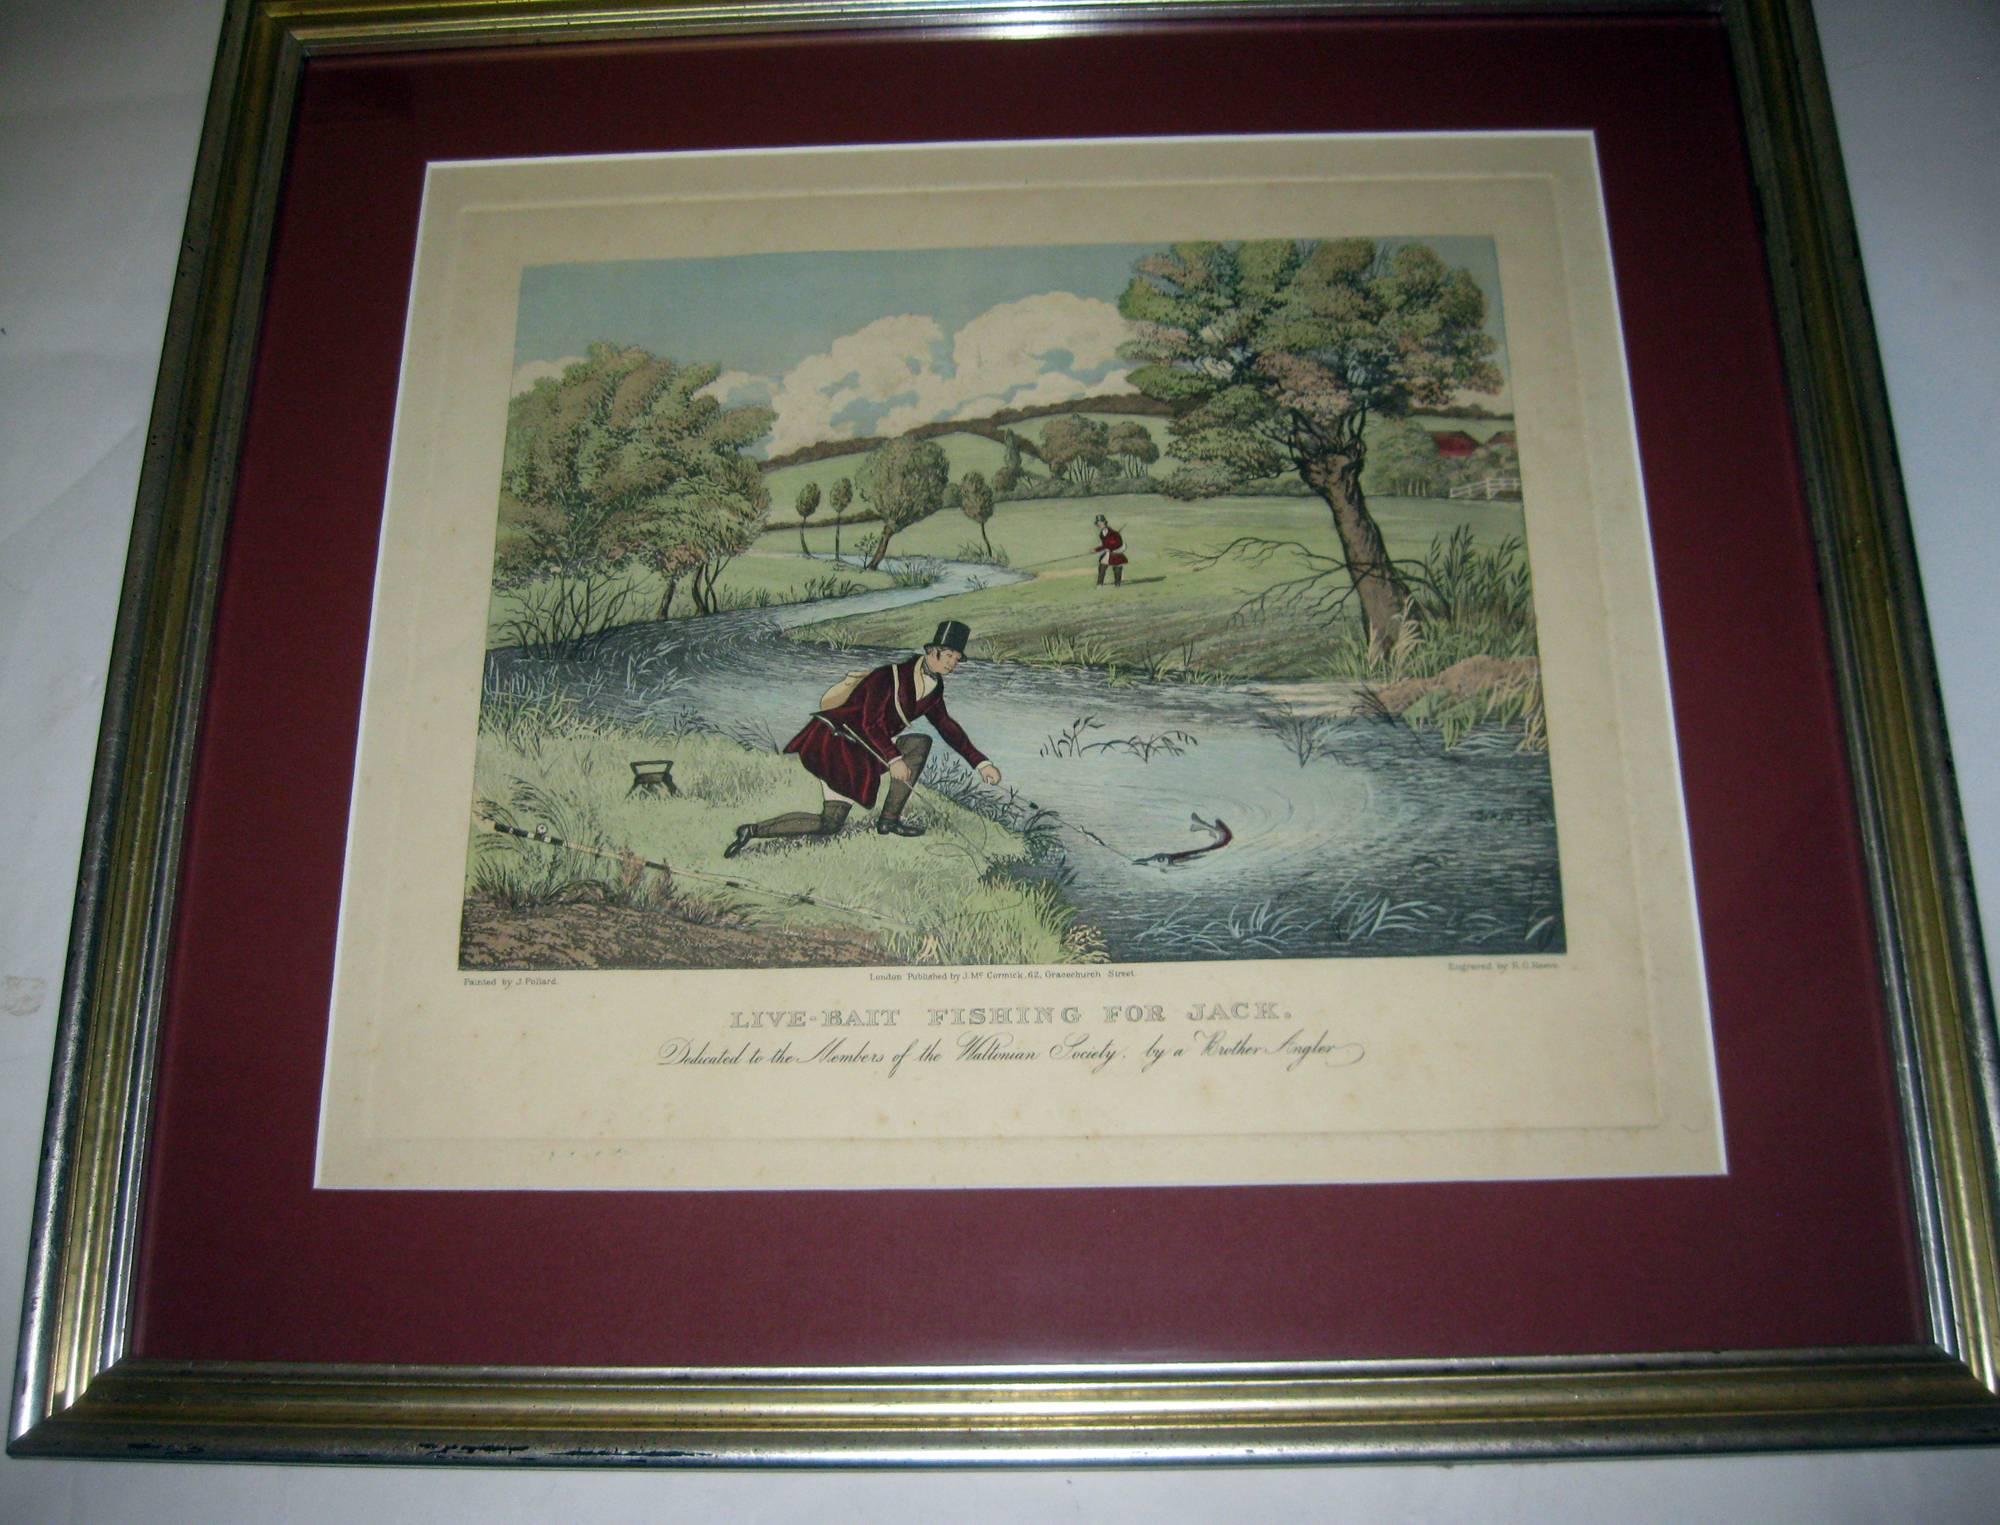 Pair of sportsman prints titled; Live-bait fishing for Jack and Fly-fishing for Trout.; Aquatints with original hand color. Done after James Pollard, by R G Reeve and published by J McCormick (printed on bottom of each print.) Framed and matted in